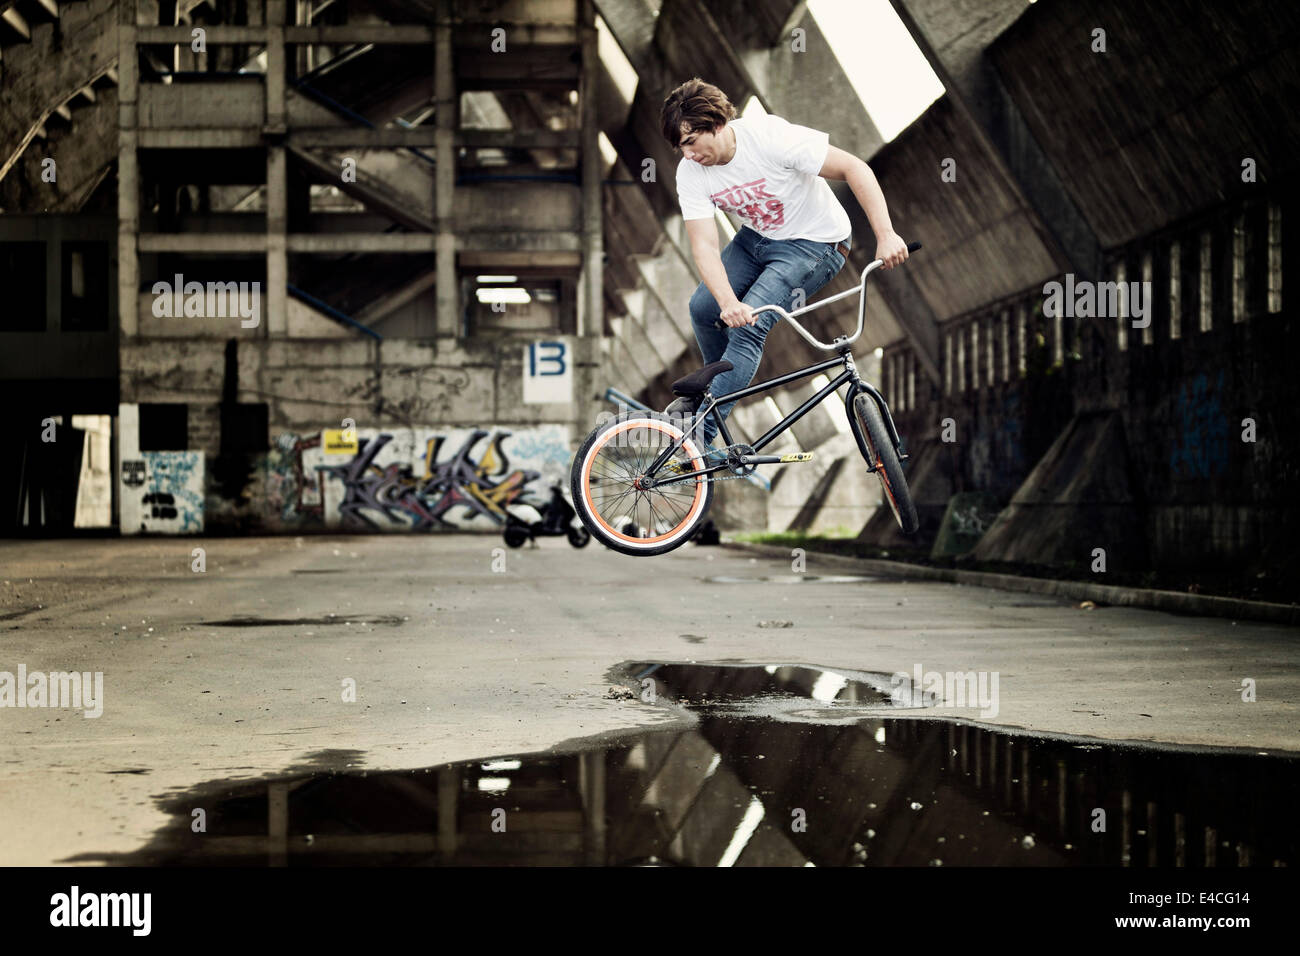 BMX biker performing a stunt over a puddle Stock Photo